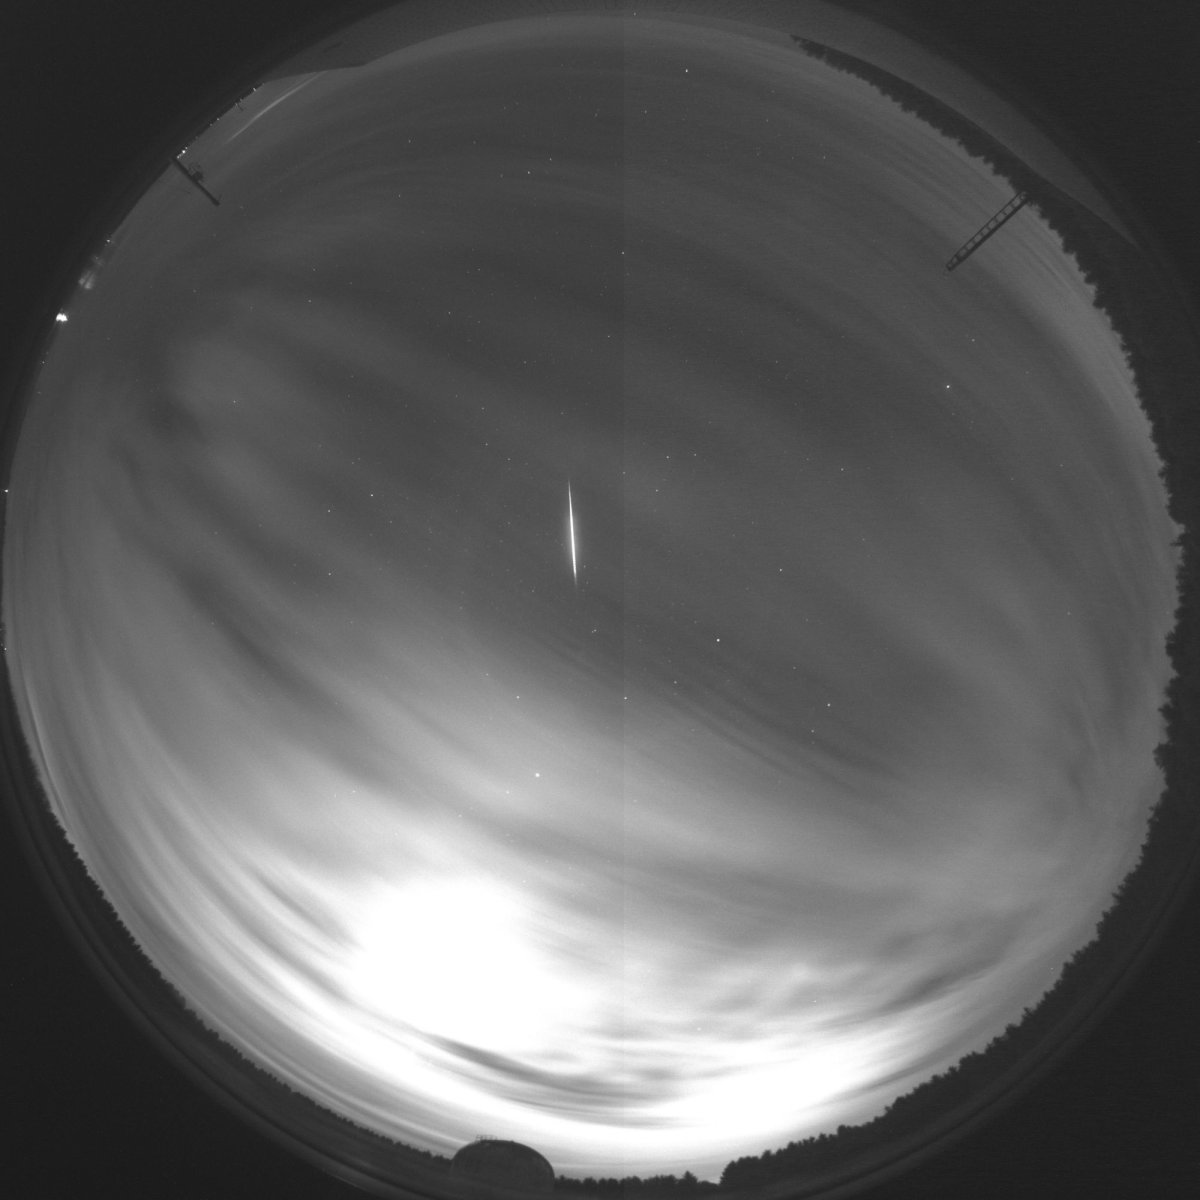 The meteoroid as seen from one of Western University's sky cameras.